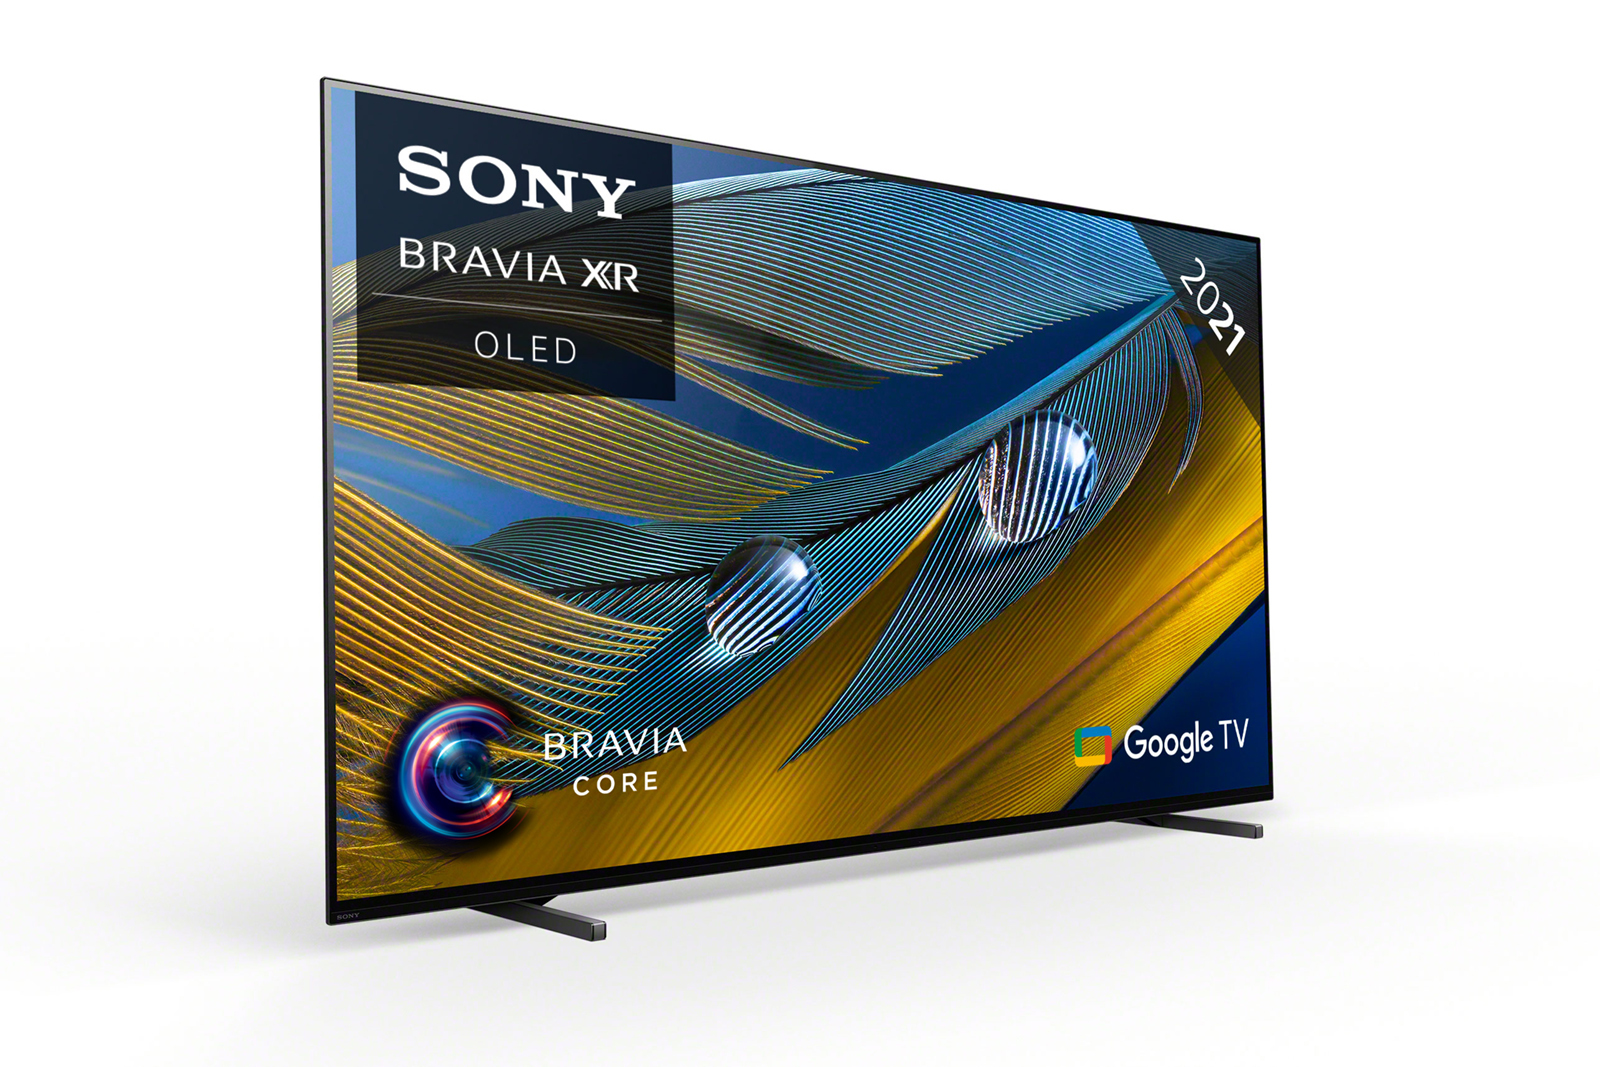 Image of Sony BRAVIA XR-55A80J - Smart TV OLED televisore 55 pollici, 4K ultra HD, HDR, con Google TV, Perfect for PlayStation™ 5 (Nero, Modello 2021)